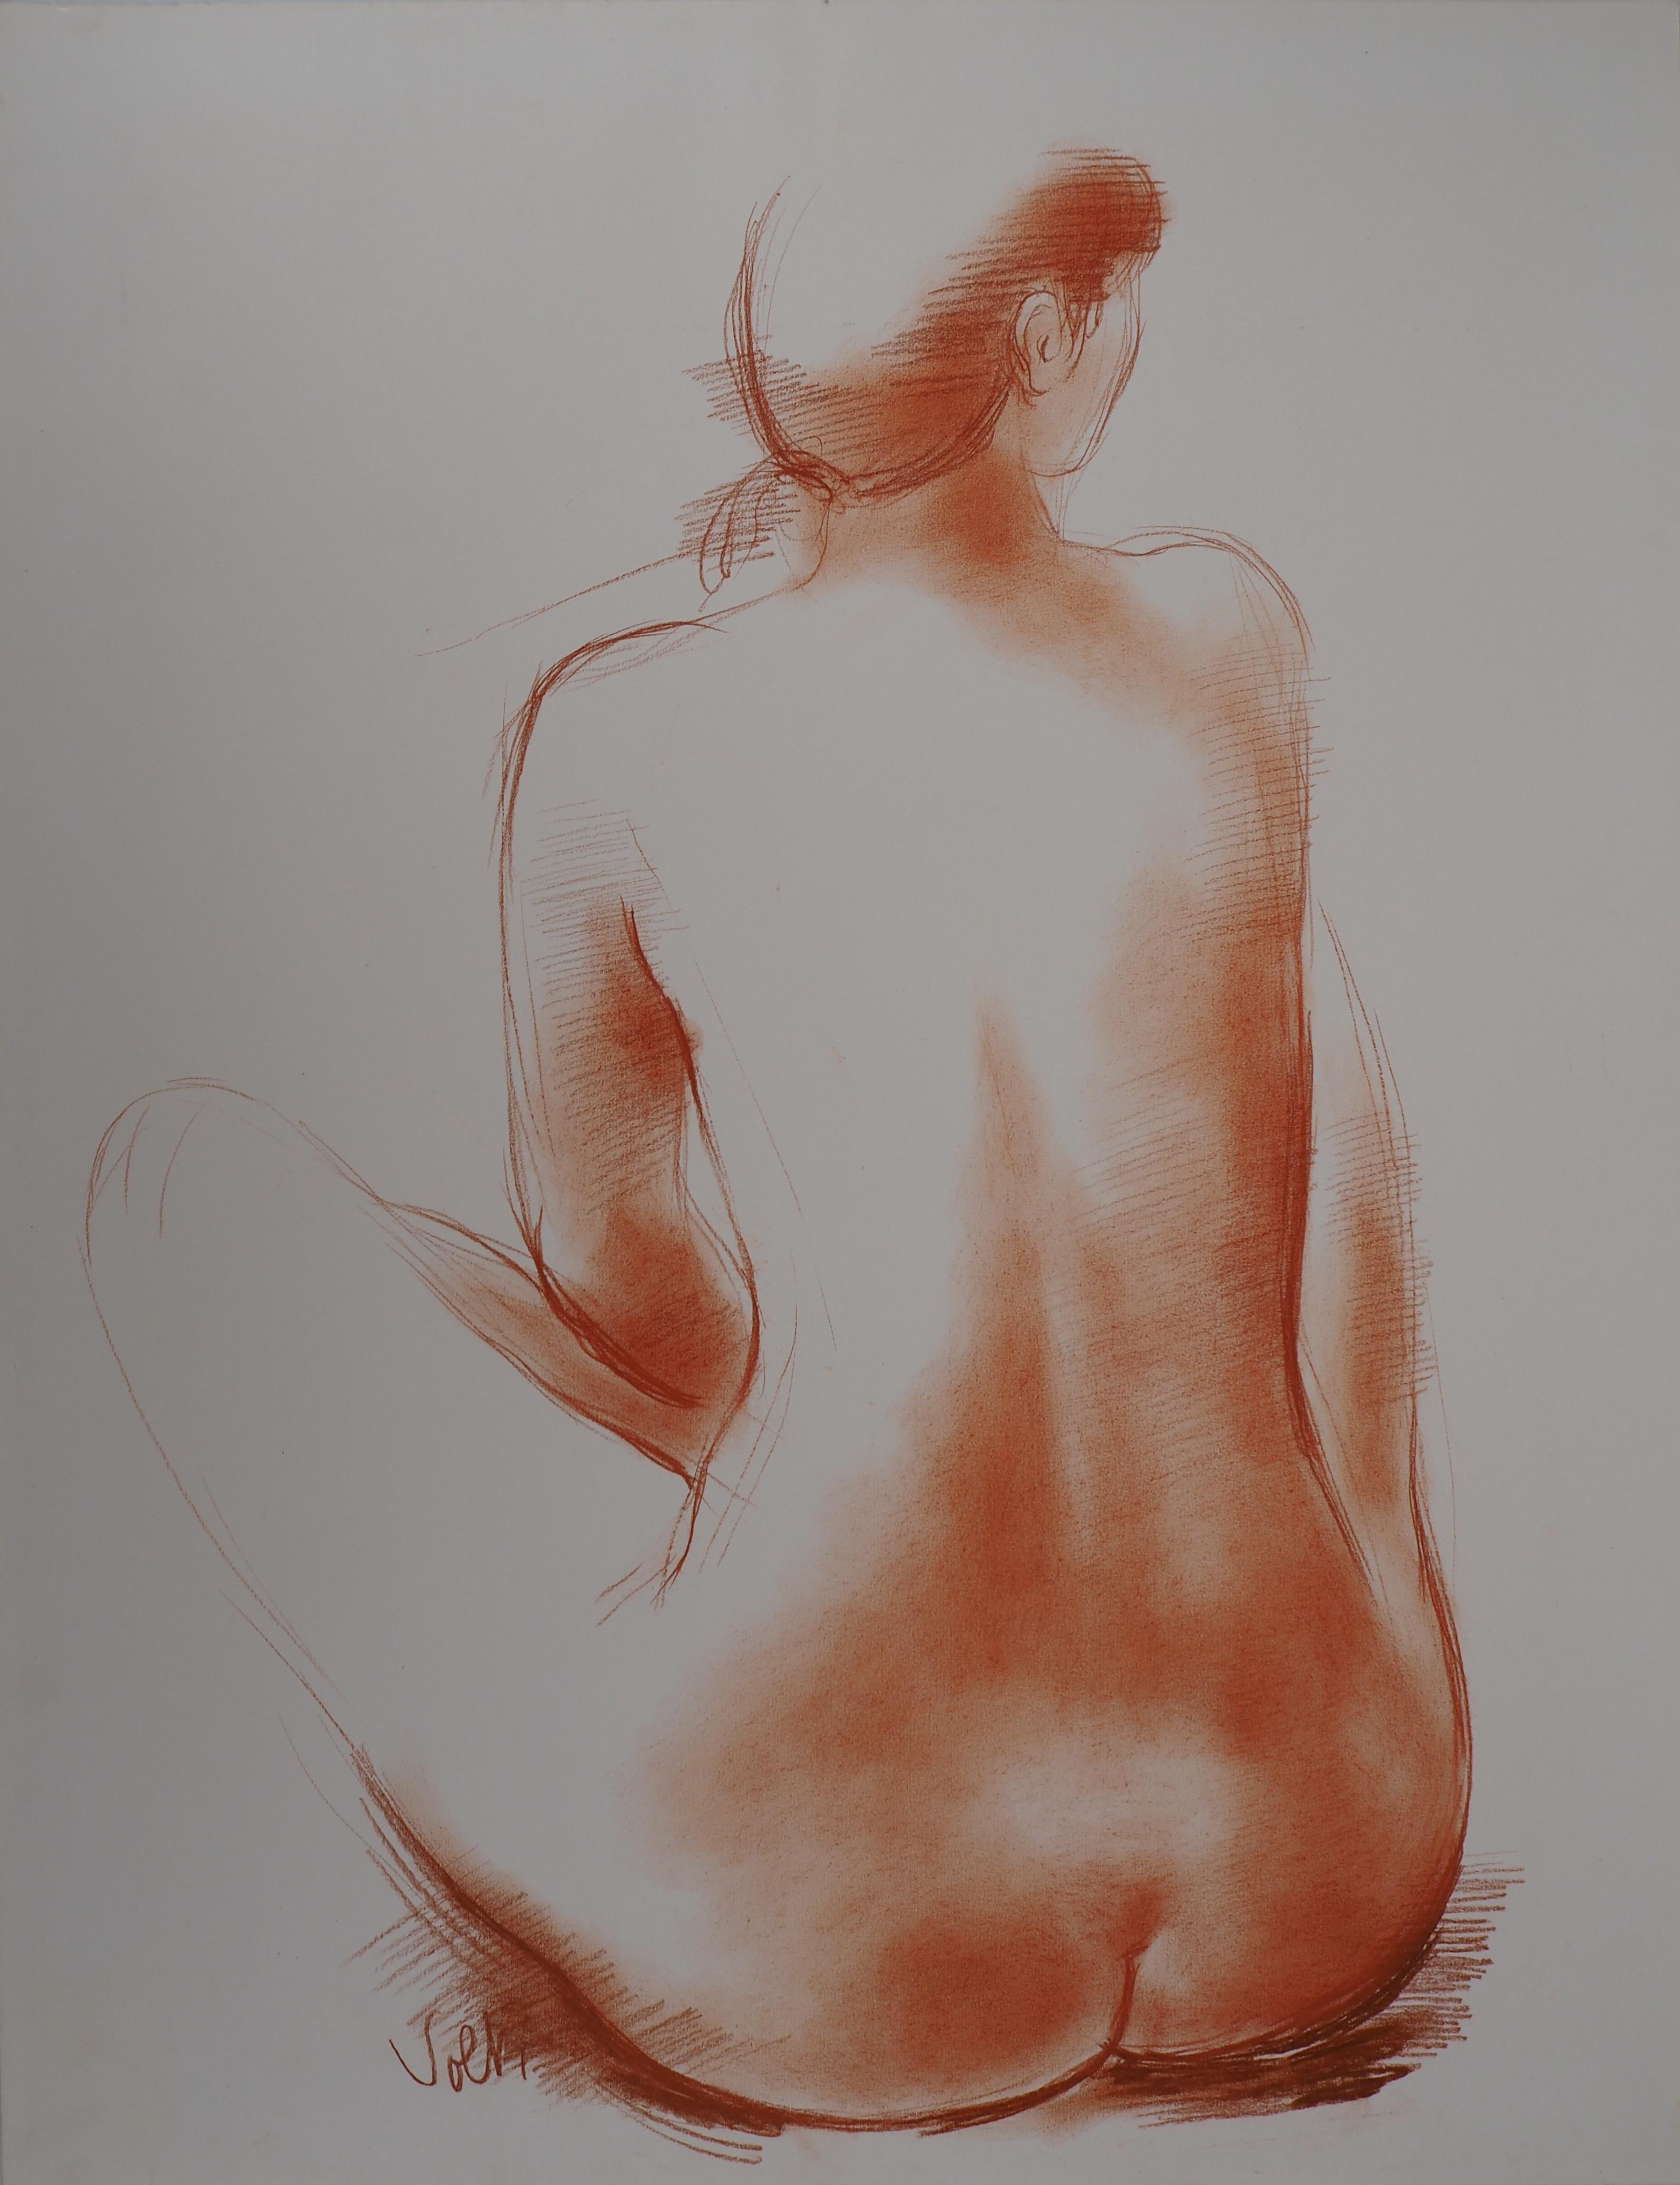 Sitted Nude - Original handsigned drawing in sanguine - Art by Antoniucci Volti